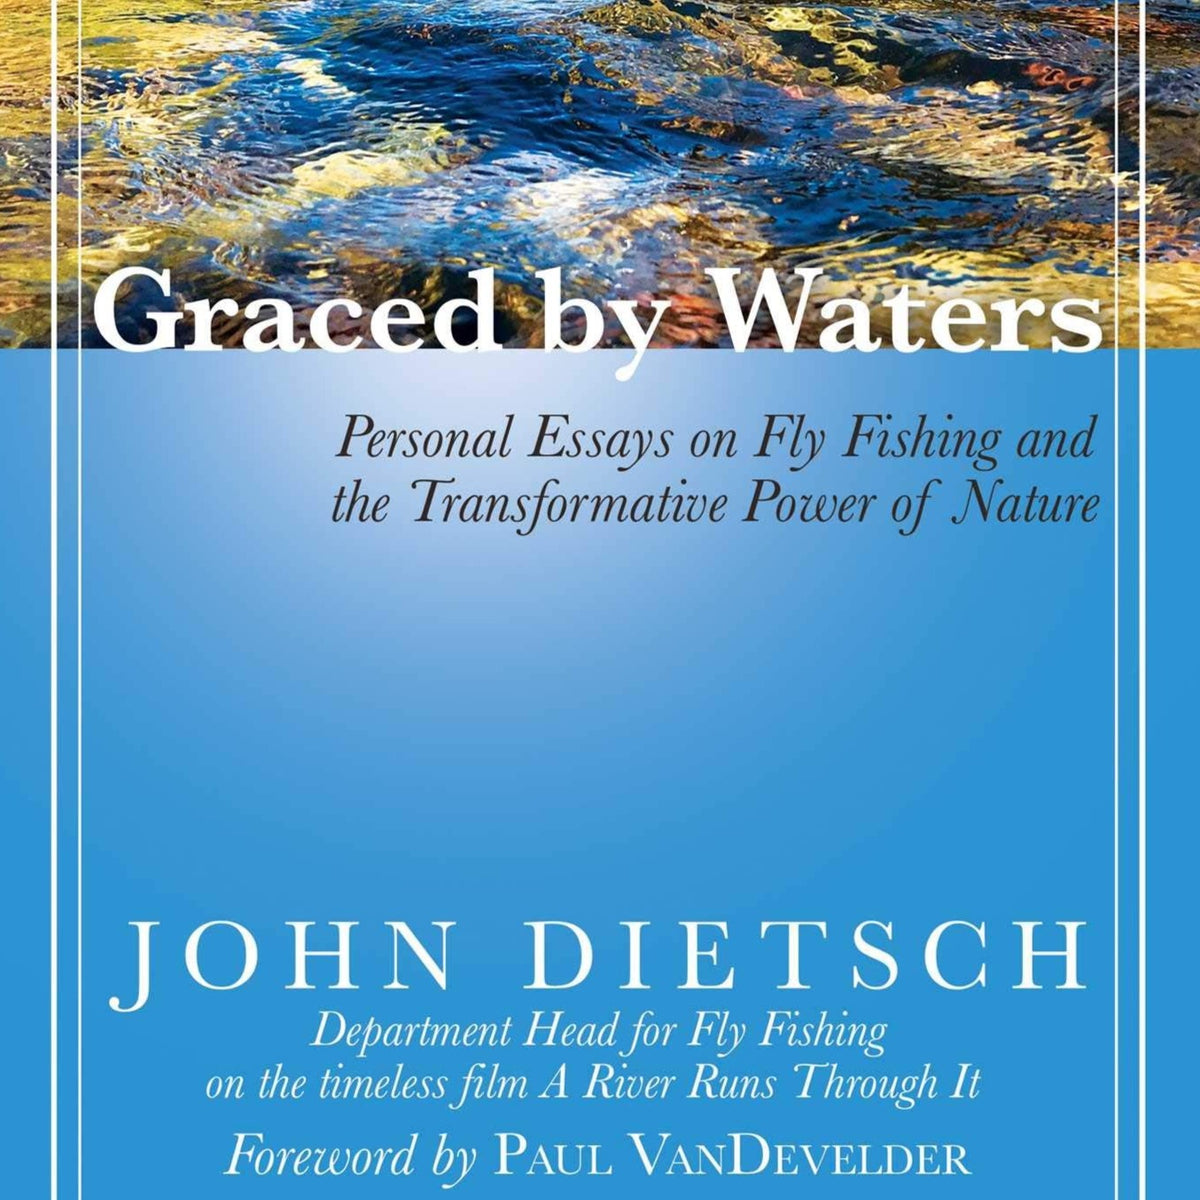  Graced by Waters: Personal Essays on Fly Fishing and